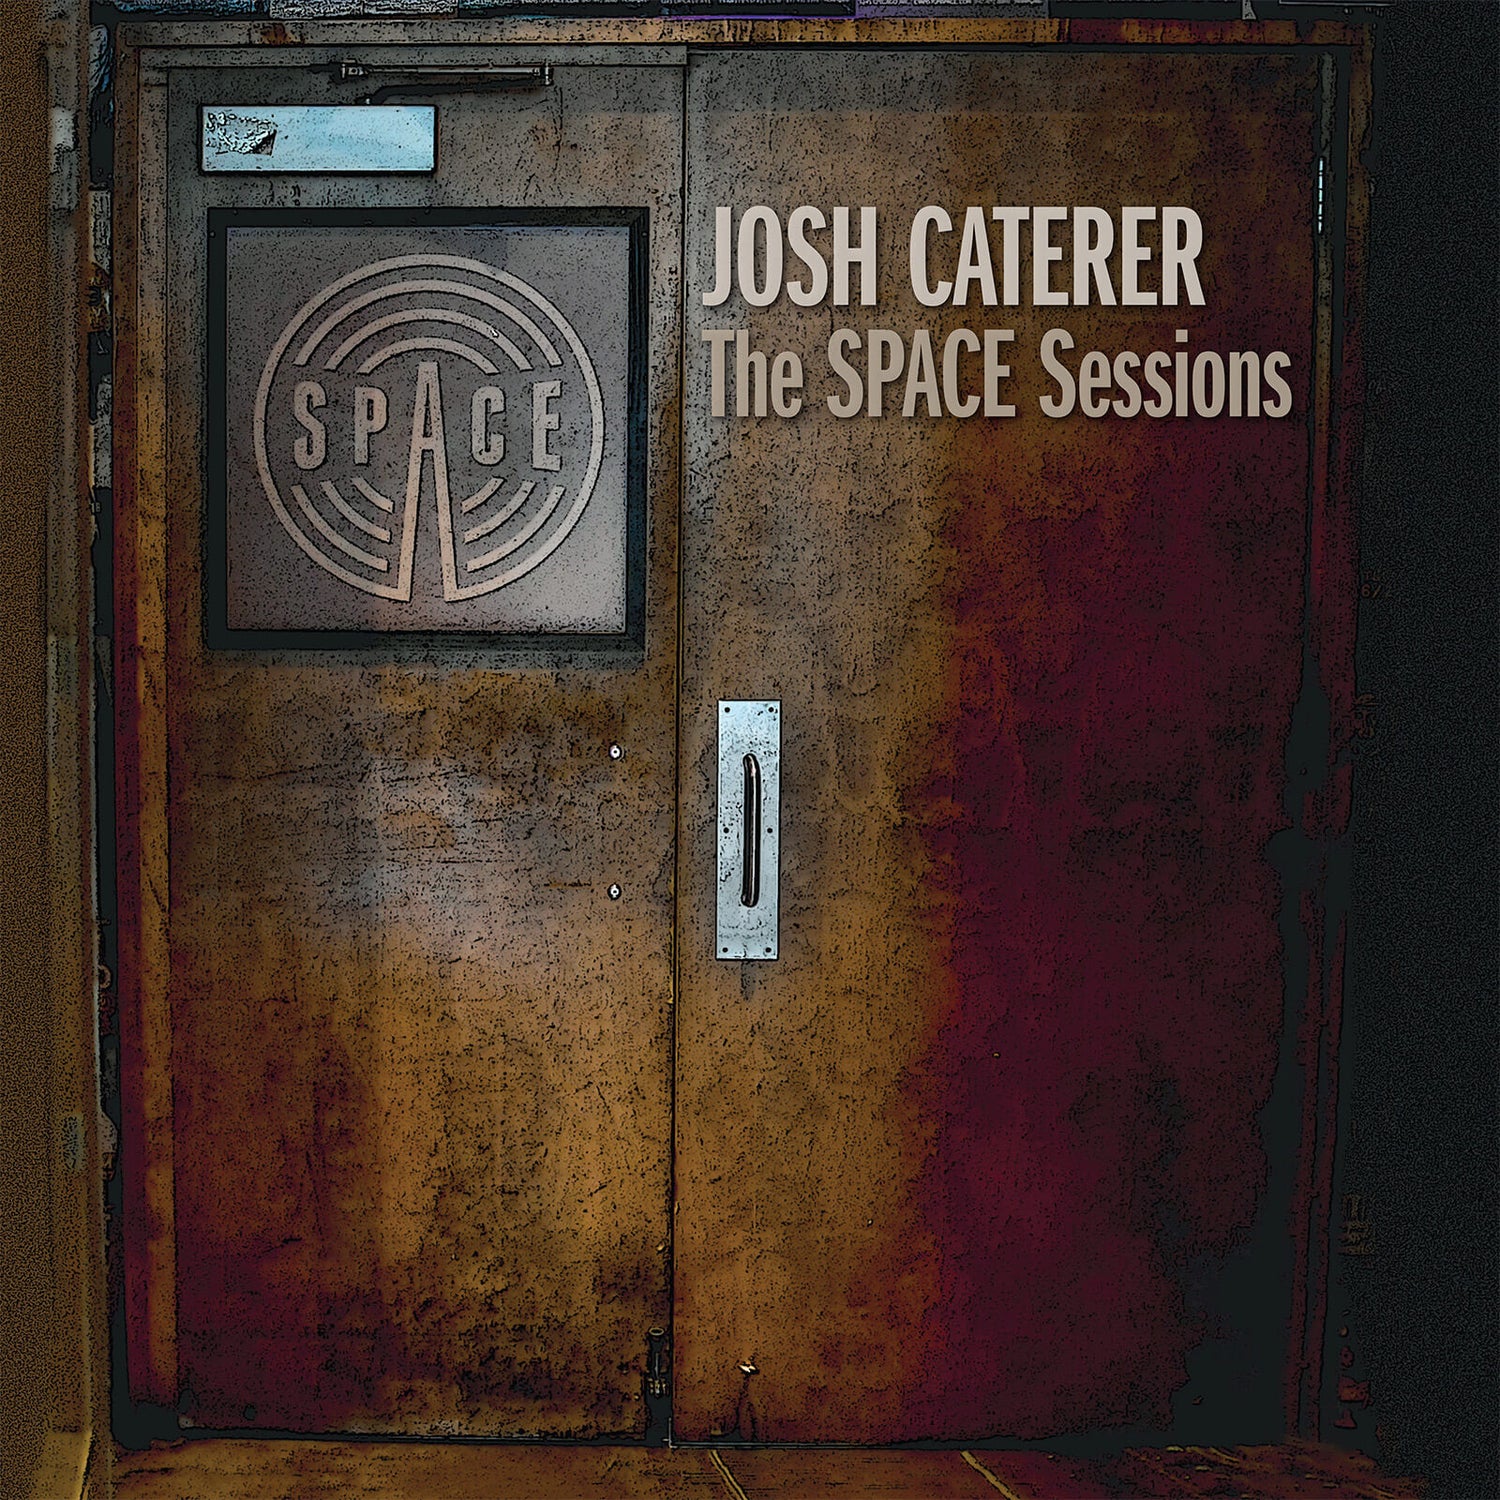 Josh Caterer - The Space Sessions Vinyl